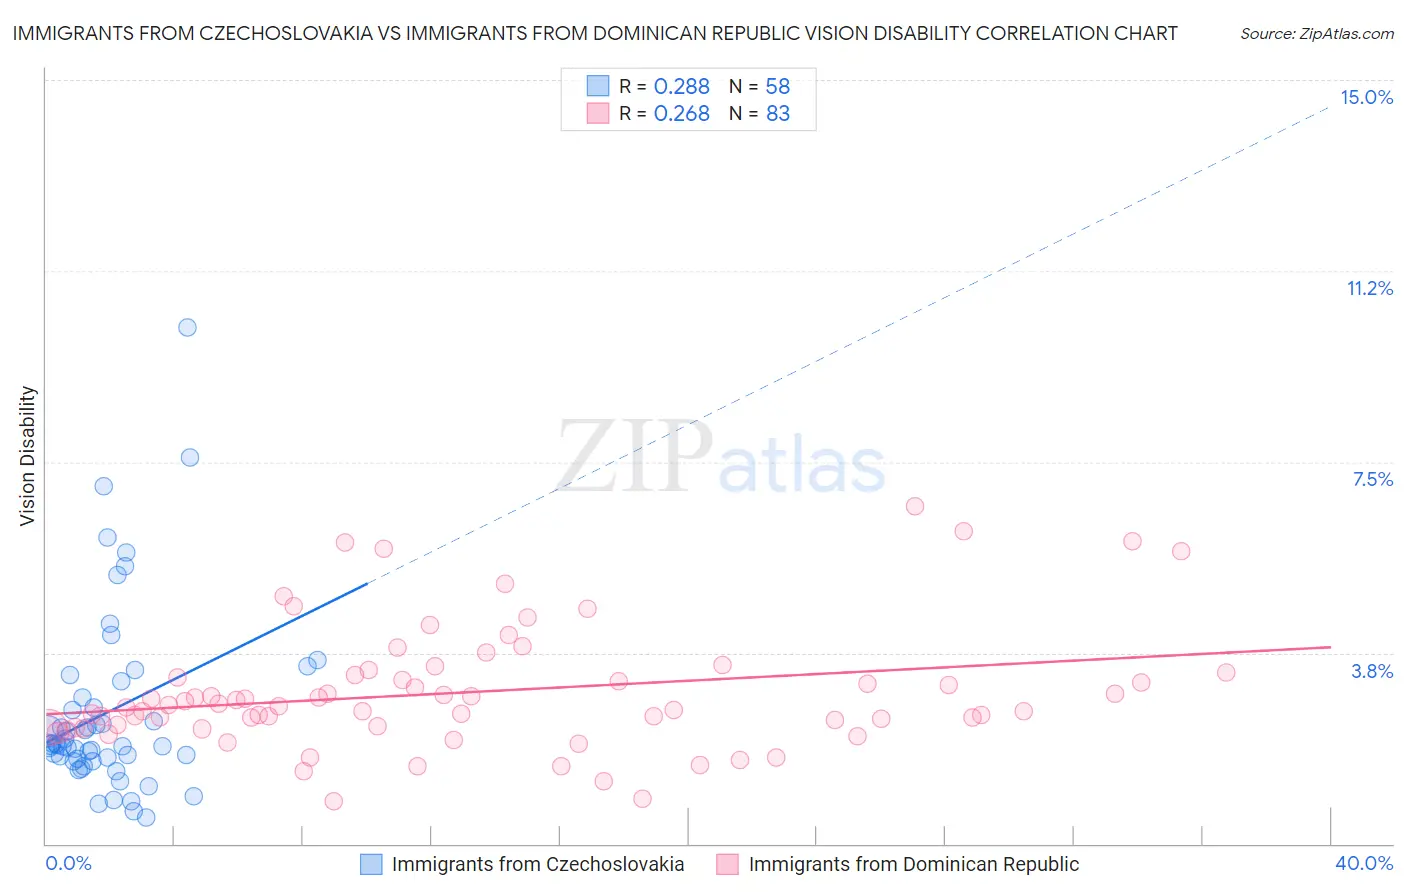 Immigrants from Czechoslovakia vs Immigrants from Dominican Republic Vision Disability